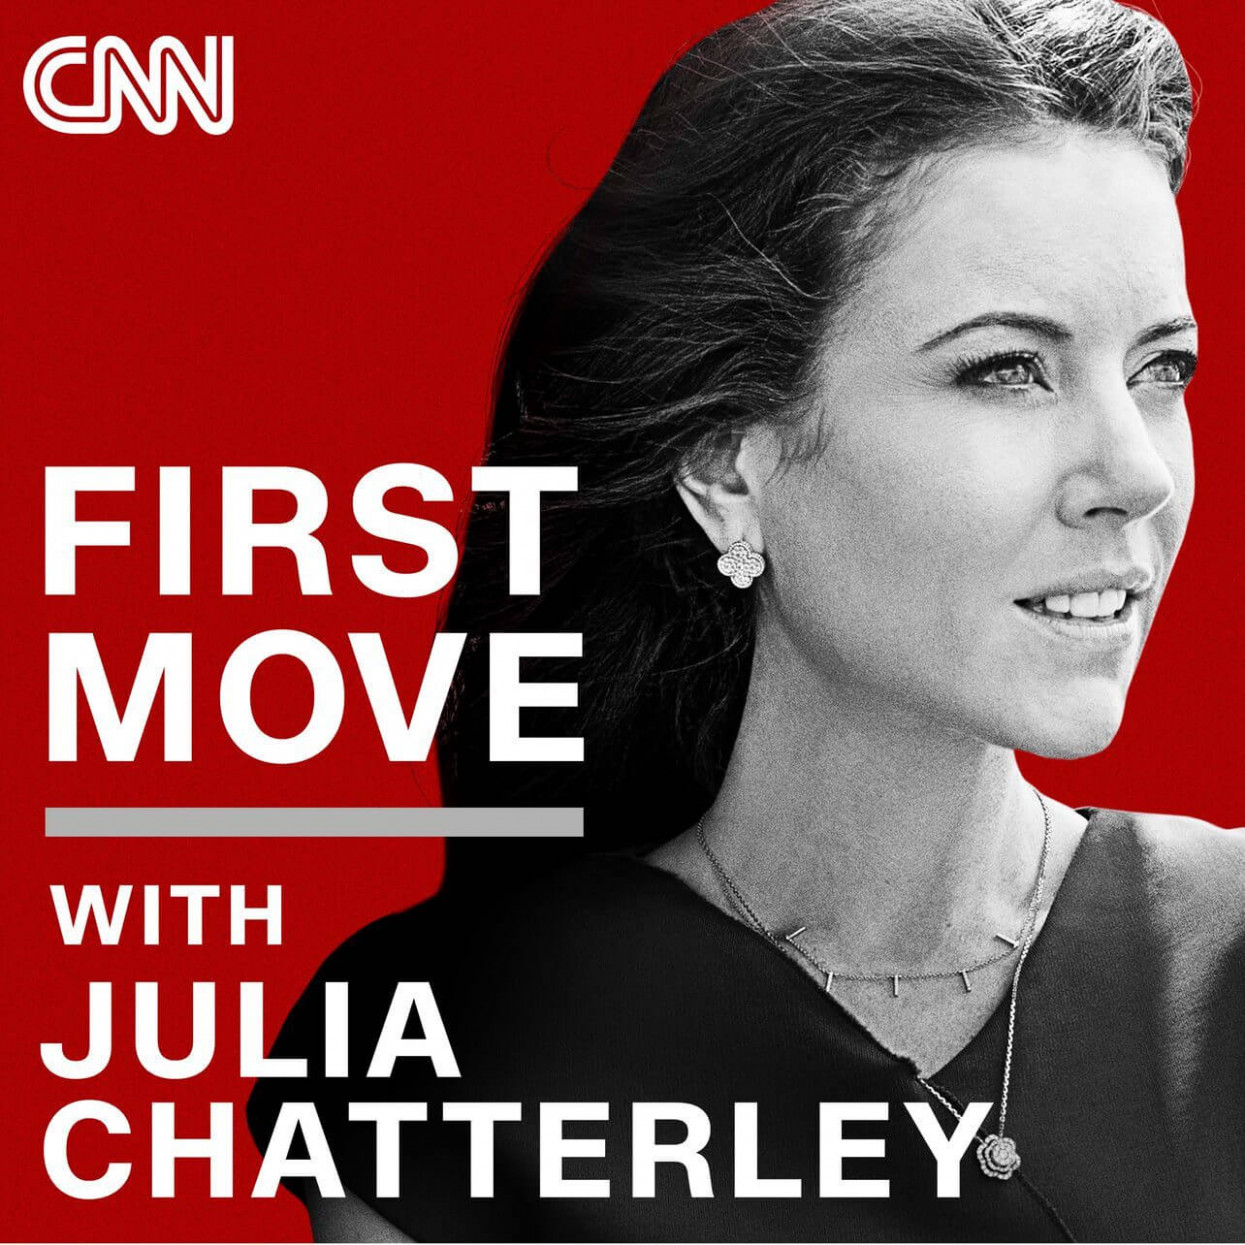 Pictures first move with julia chatterley